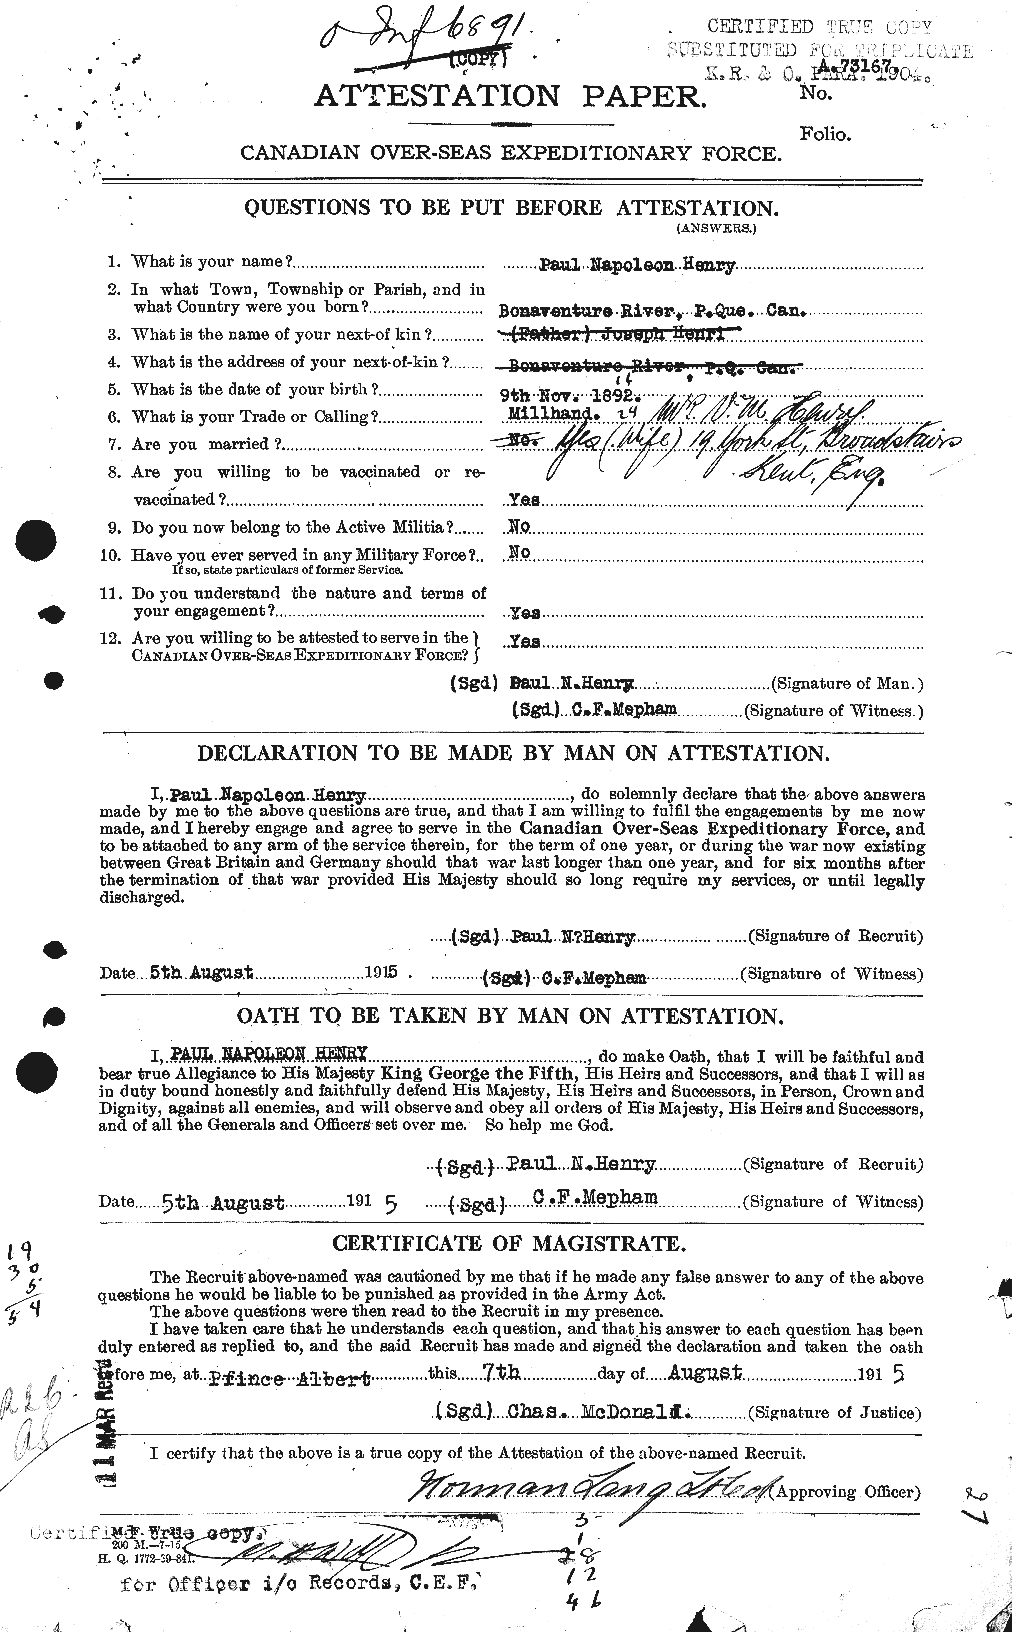 Personnel Records of the First World War - CEF 387680a